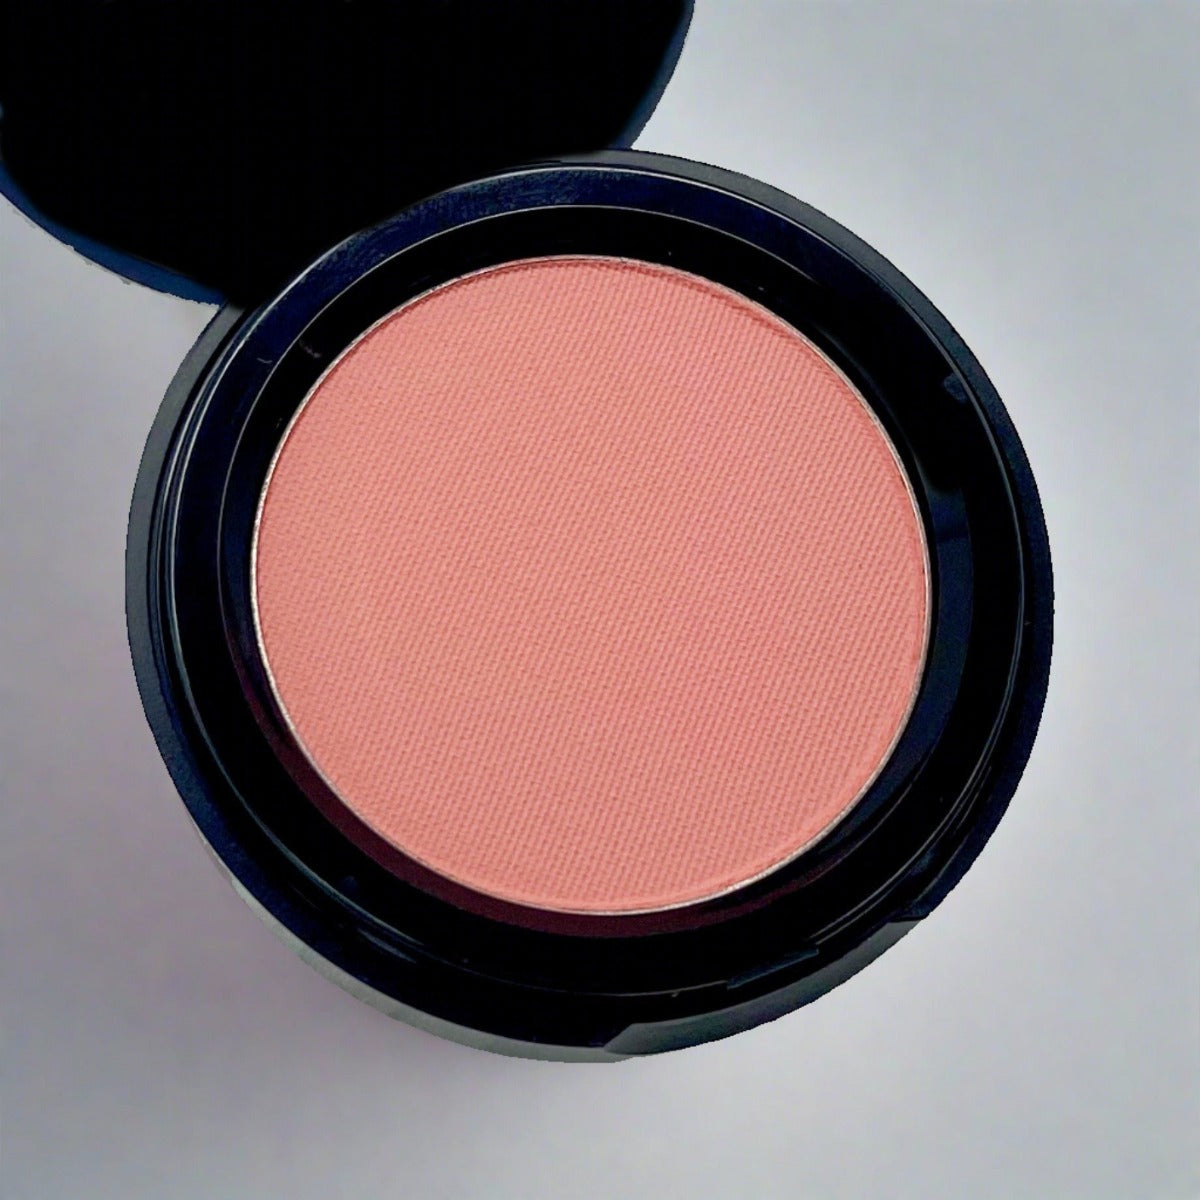  Cosmetic container of peach pink matte pressed blush displaying its color and texture